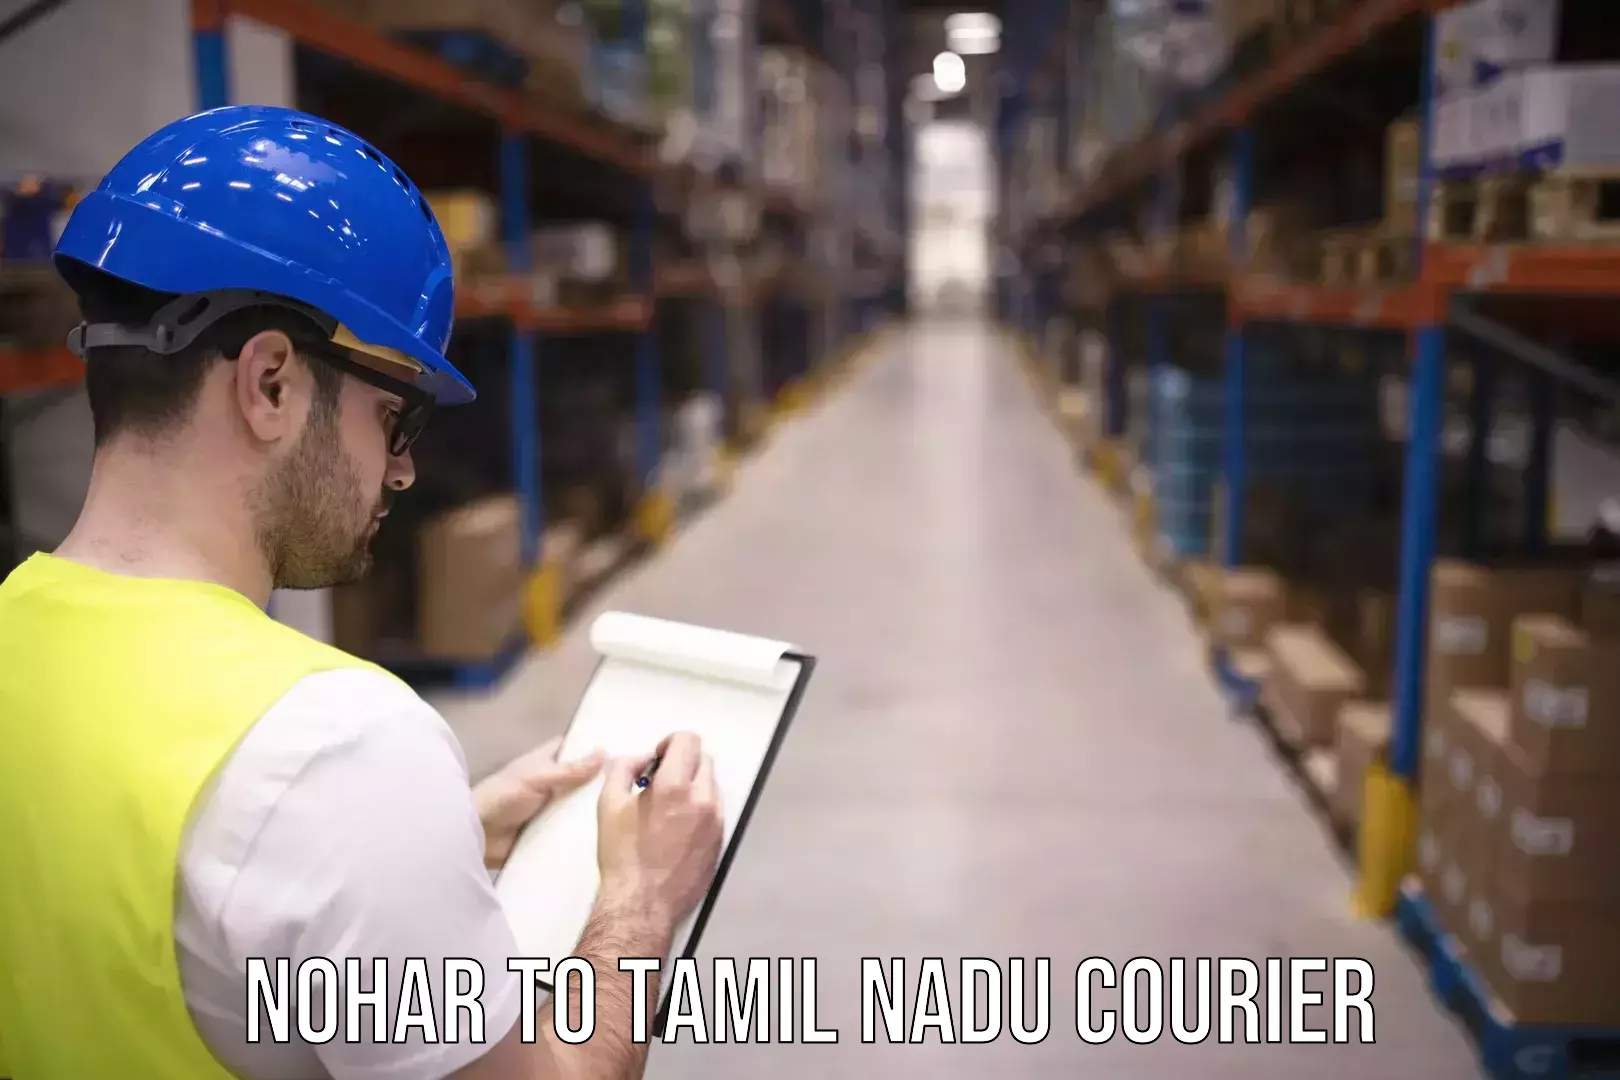 Express courier facilities Nohar to Thisayanvilai